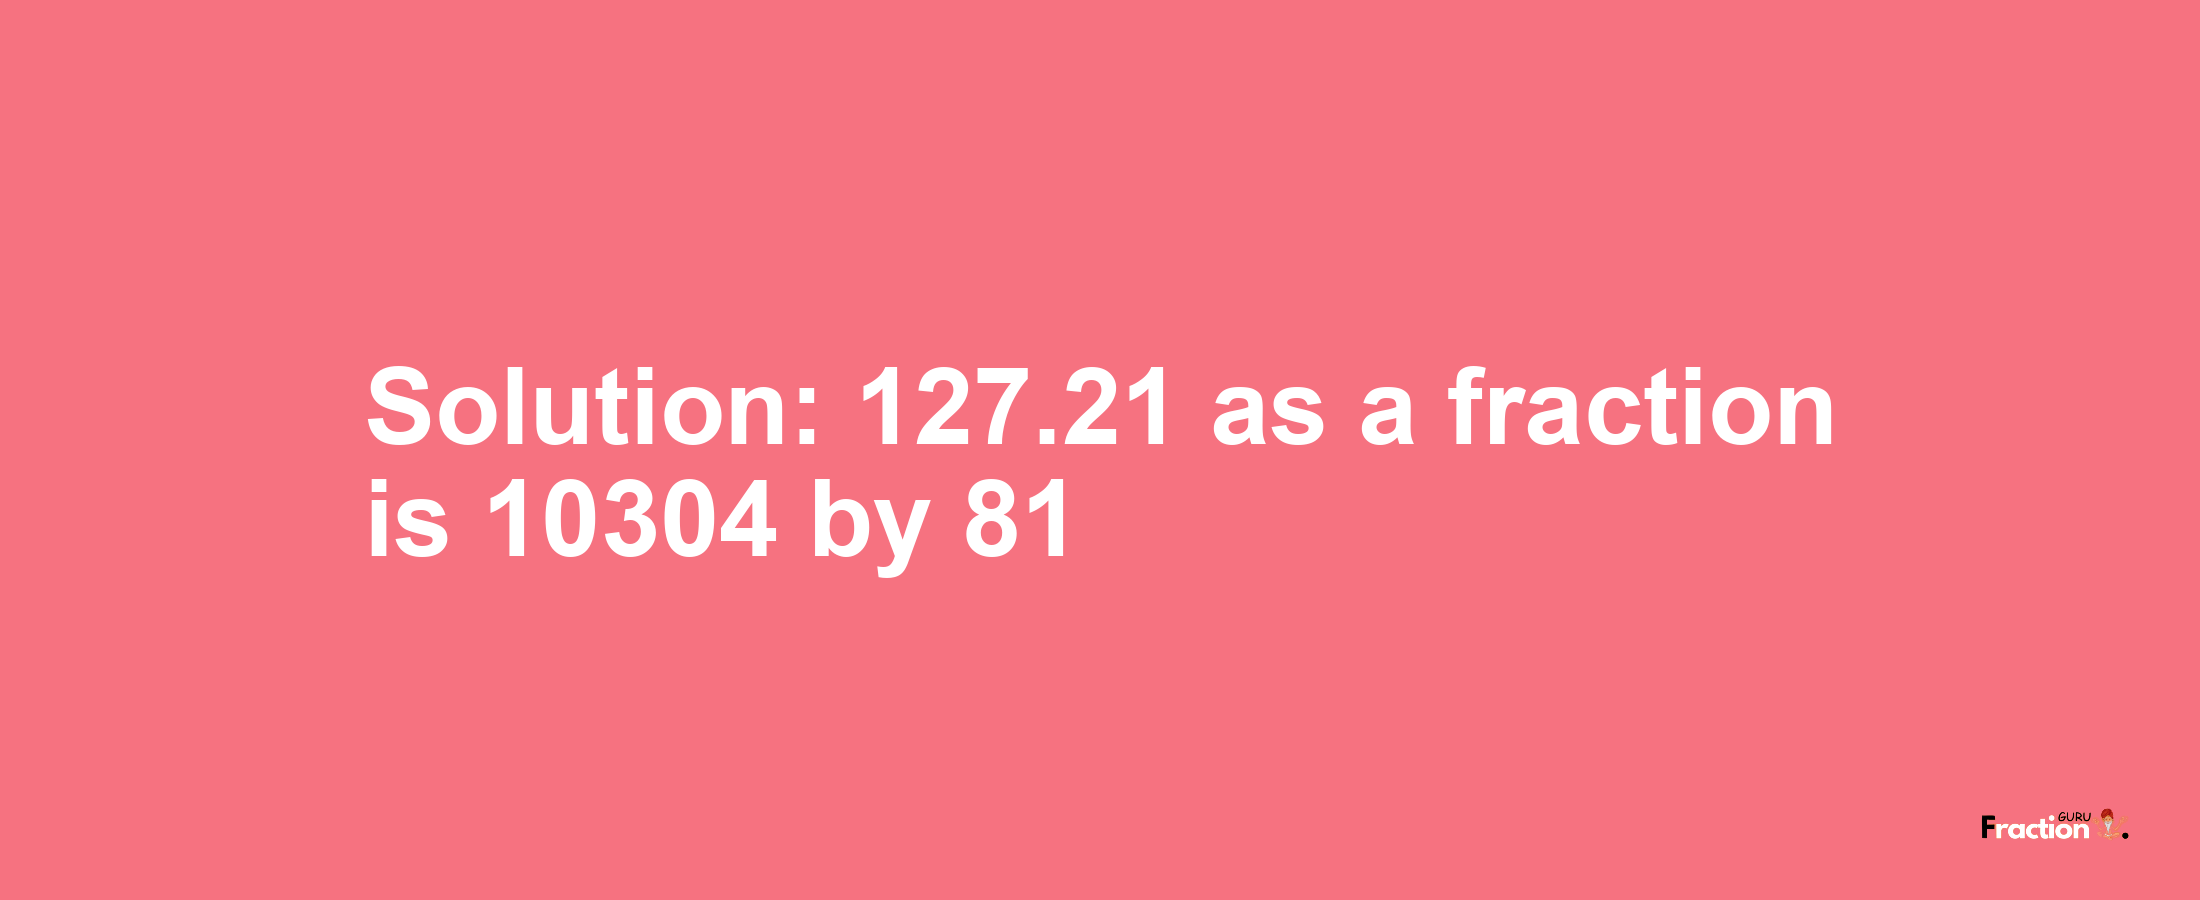 Solution:127.21 as a fraction is 10304/81